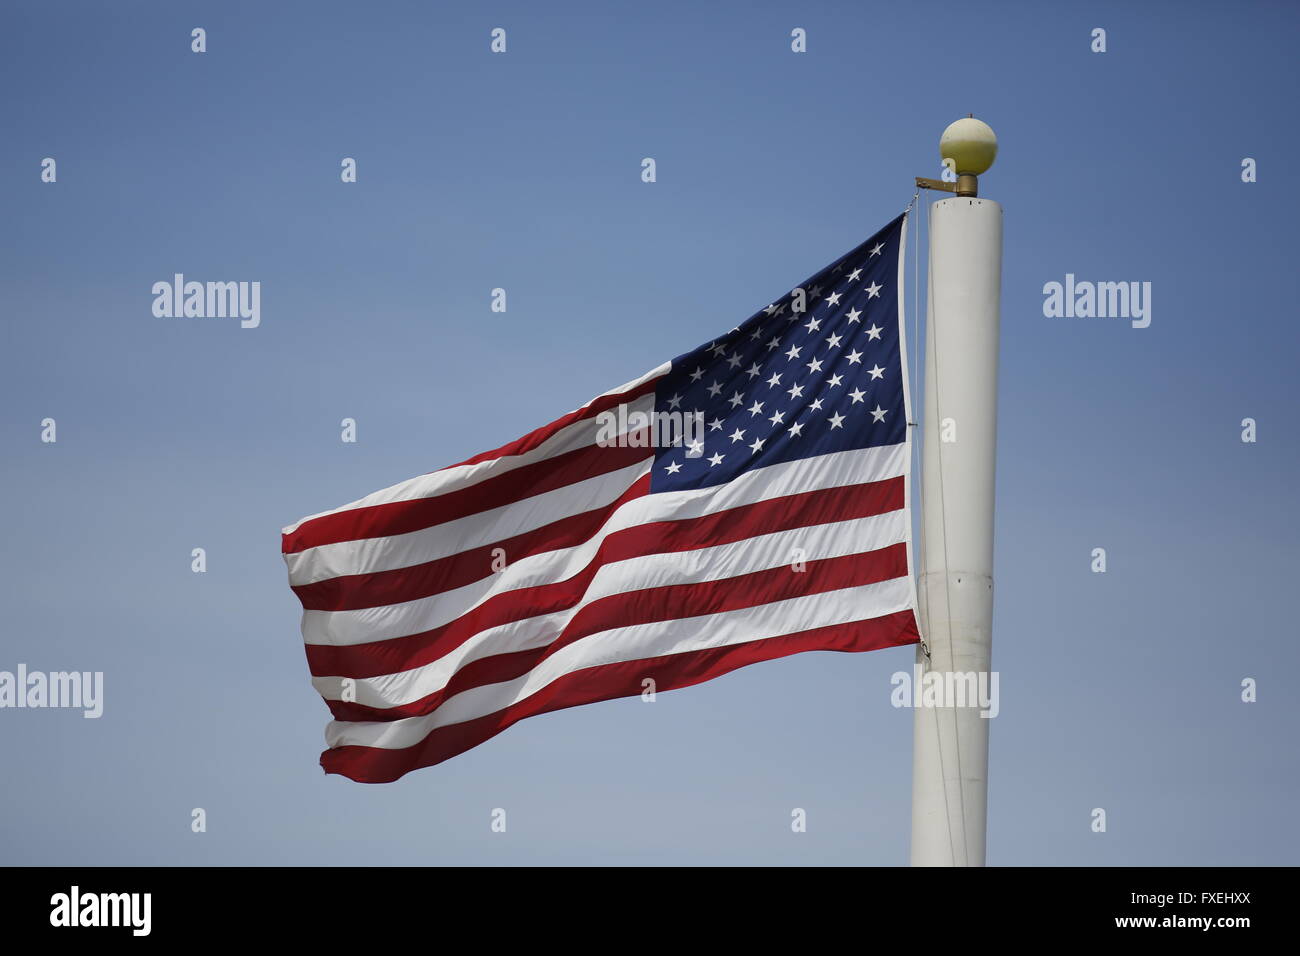 United States flag flying on cell phone tower pole at the tennis stadium on Daniel Island in Charleston, South Carolina Stock Photo